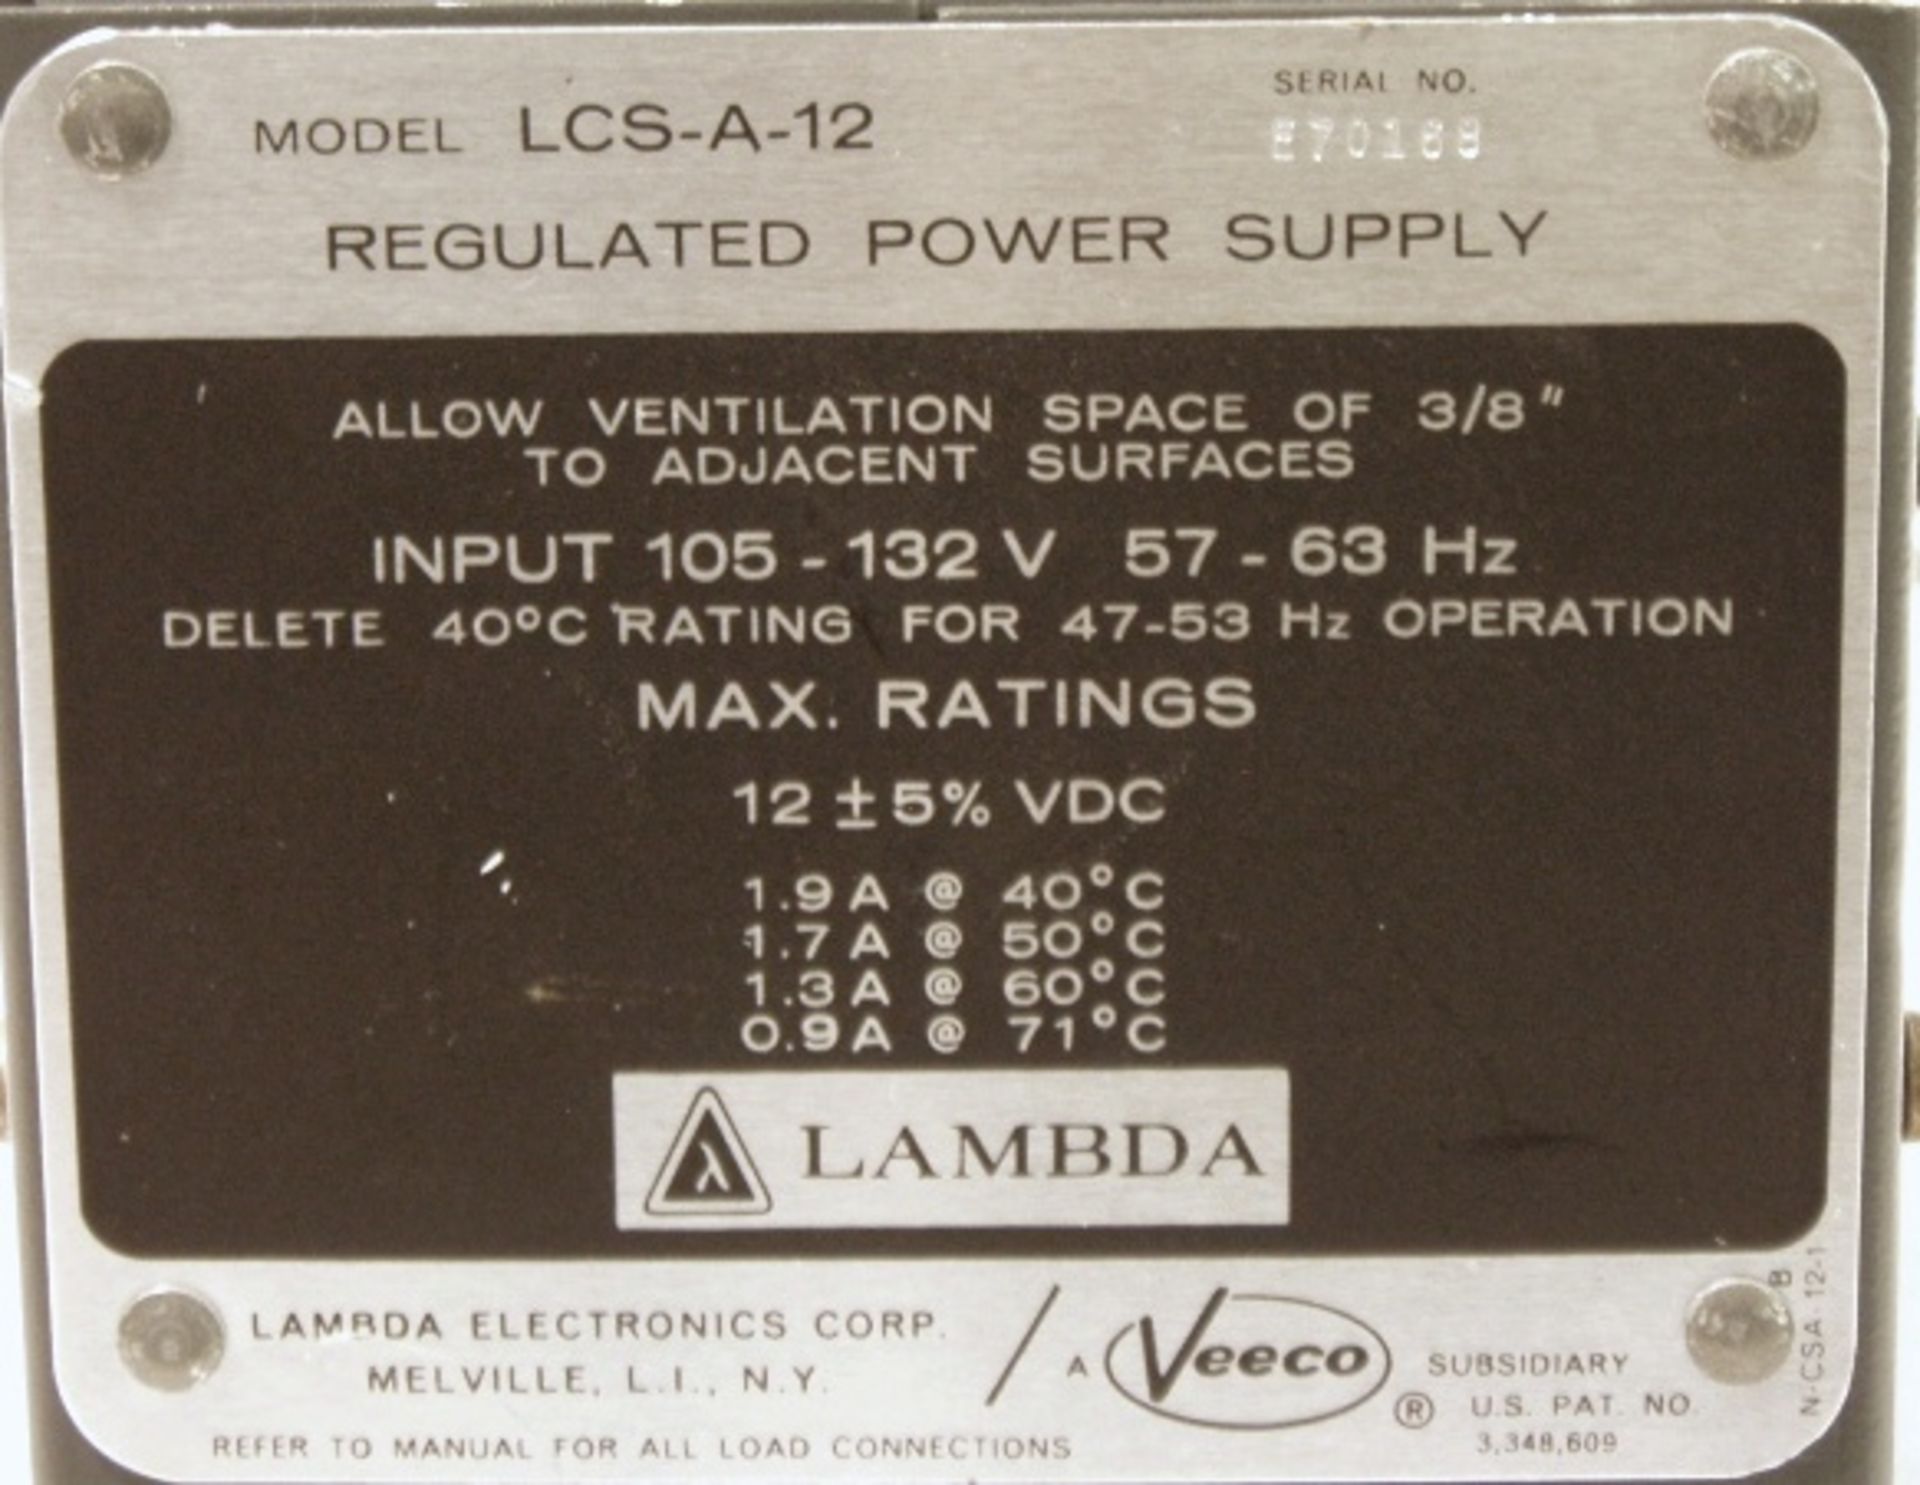 LAMBDA MODEL LCS-A-12, REGULATED POWER SUPPLY - Image 3 of 3